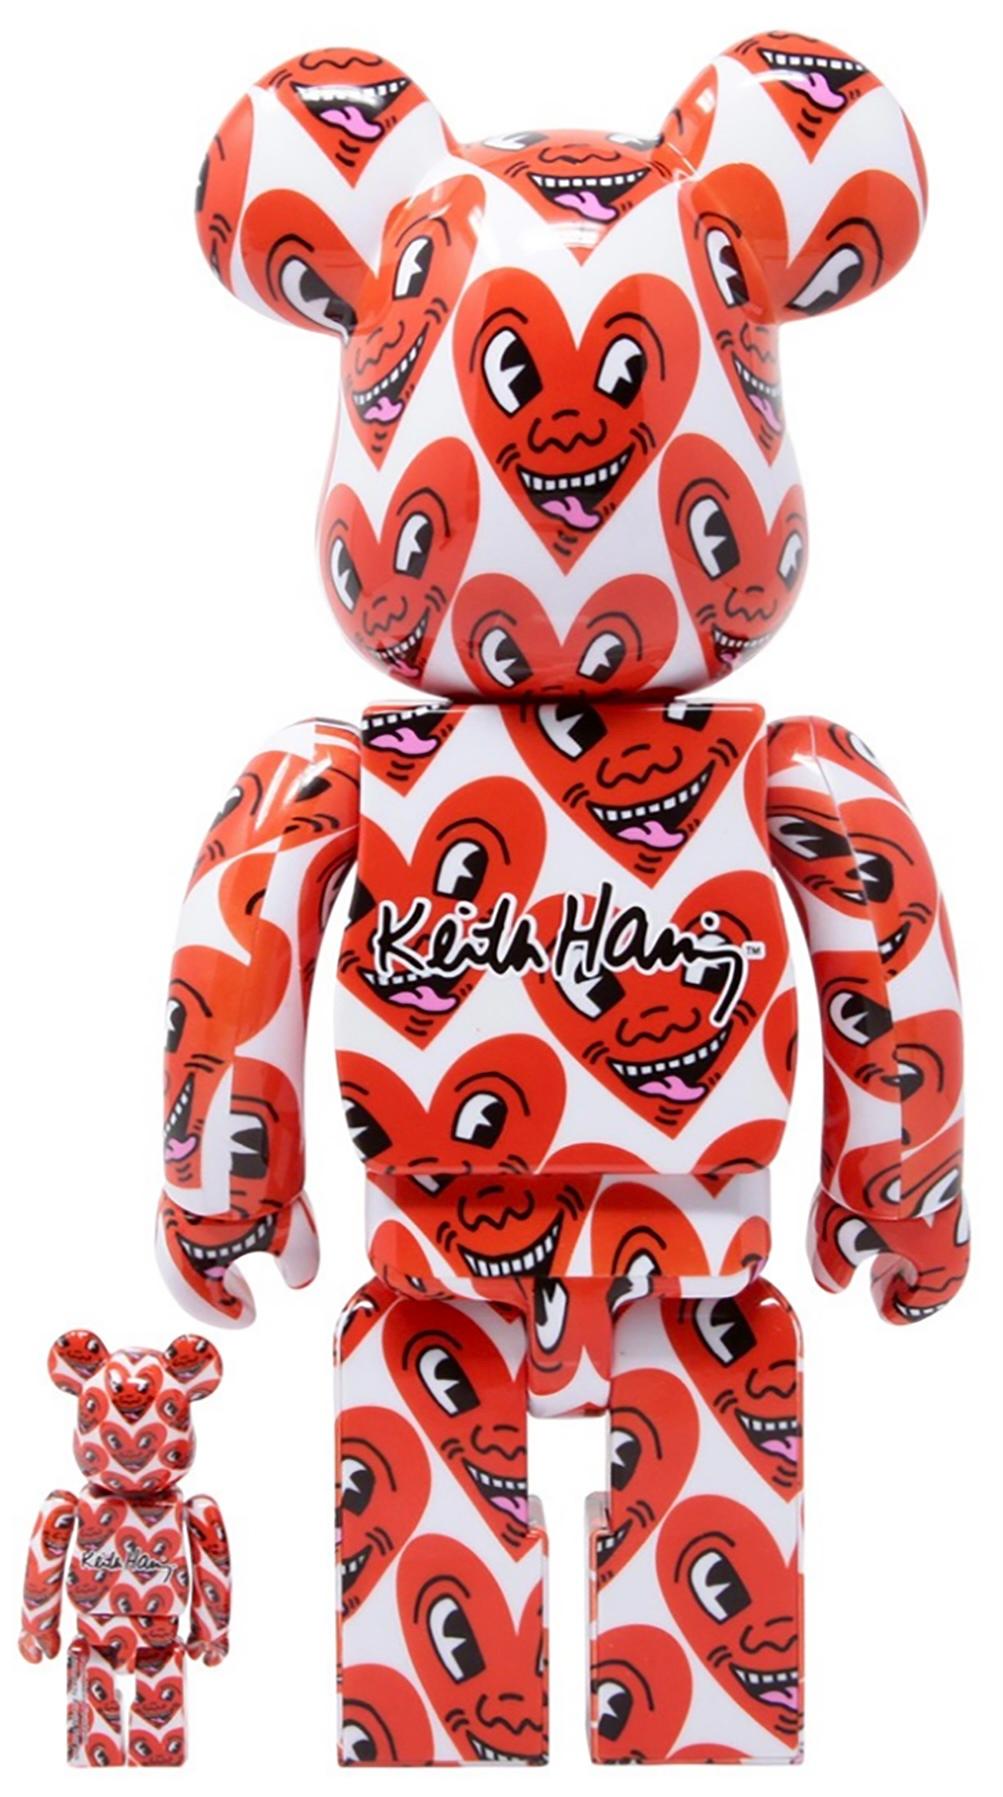 Keith Haring Bearbrick 400% figure (Haring BE@RBRICK) - Sculpture by (after) Keith Haring